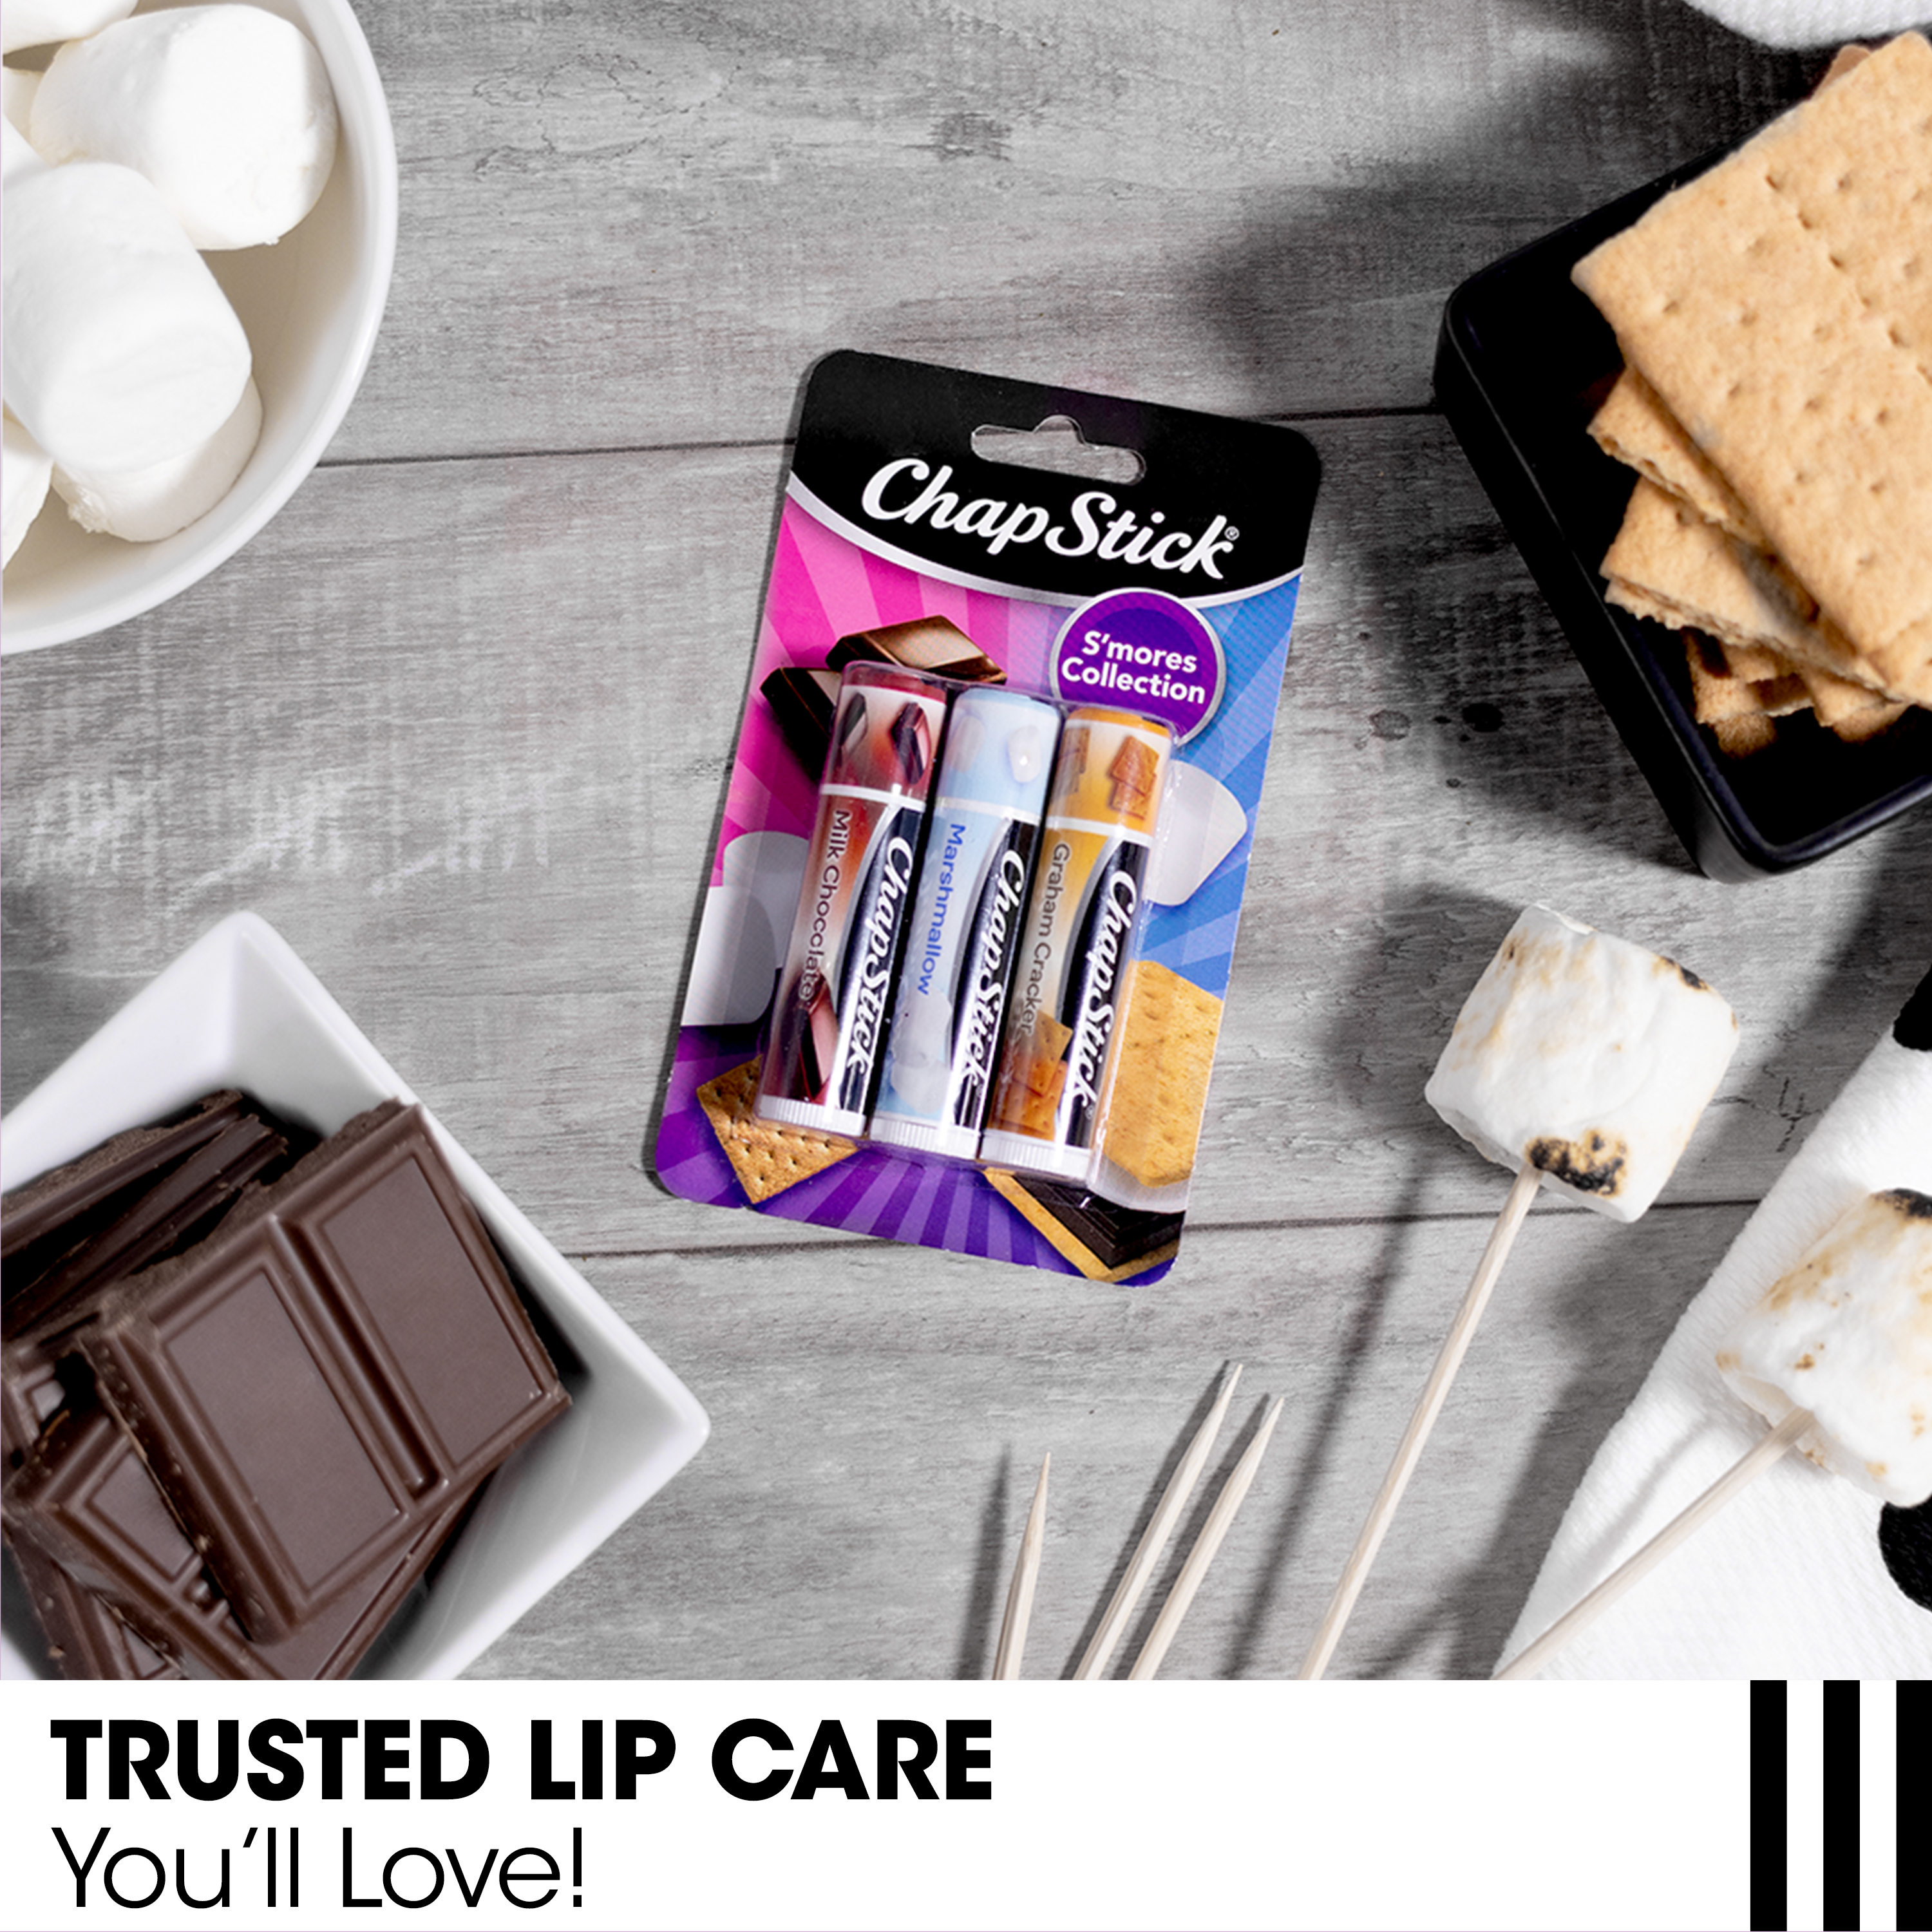 ChapStick S'mores Collection Flavored Lip Balm, Multi-Flavored, 0.15 Oz, 3 Pack - image 3 of 6